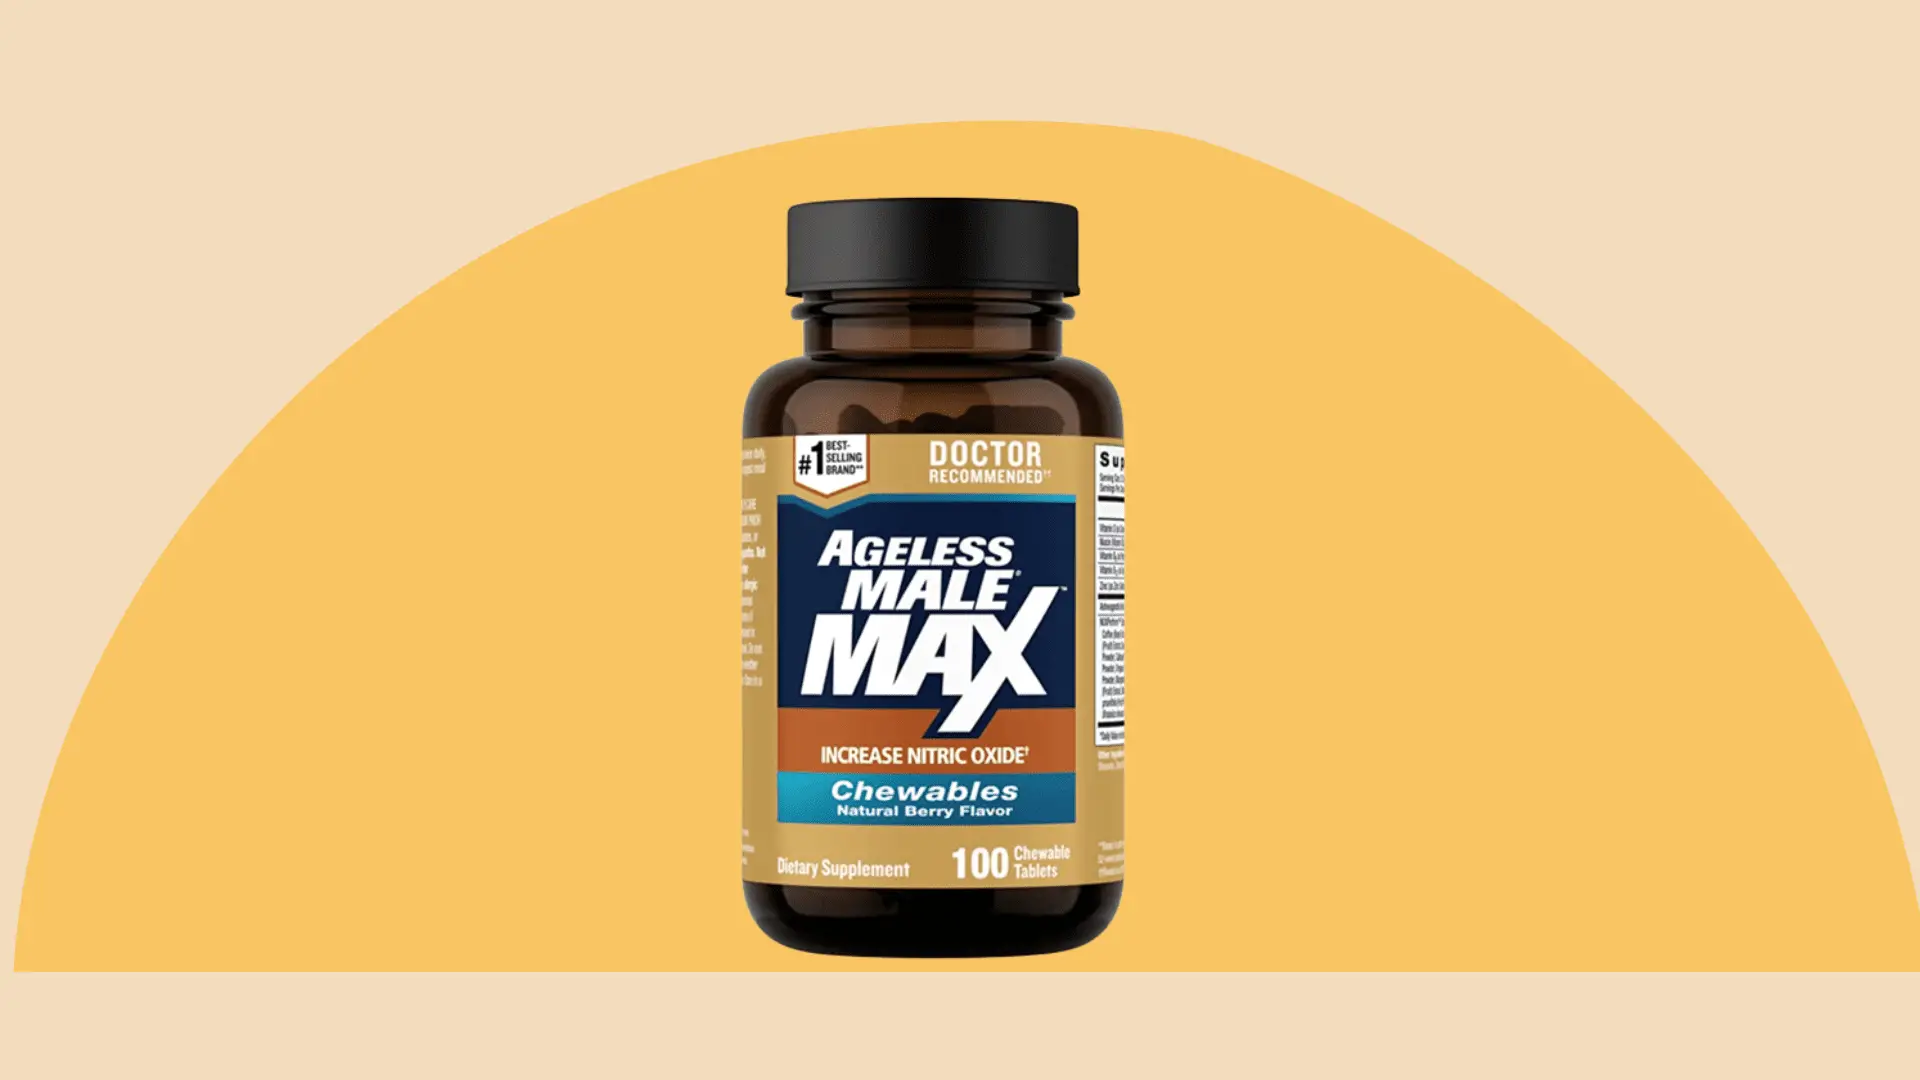 Ageless Male Max Supplement in Center